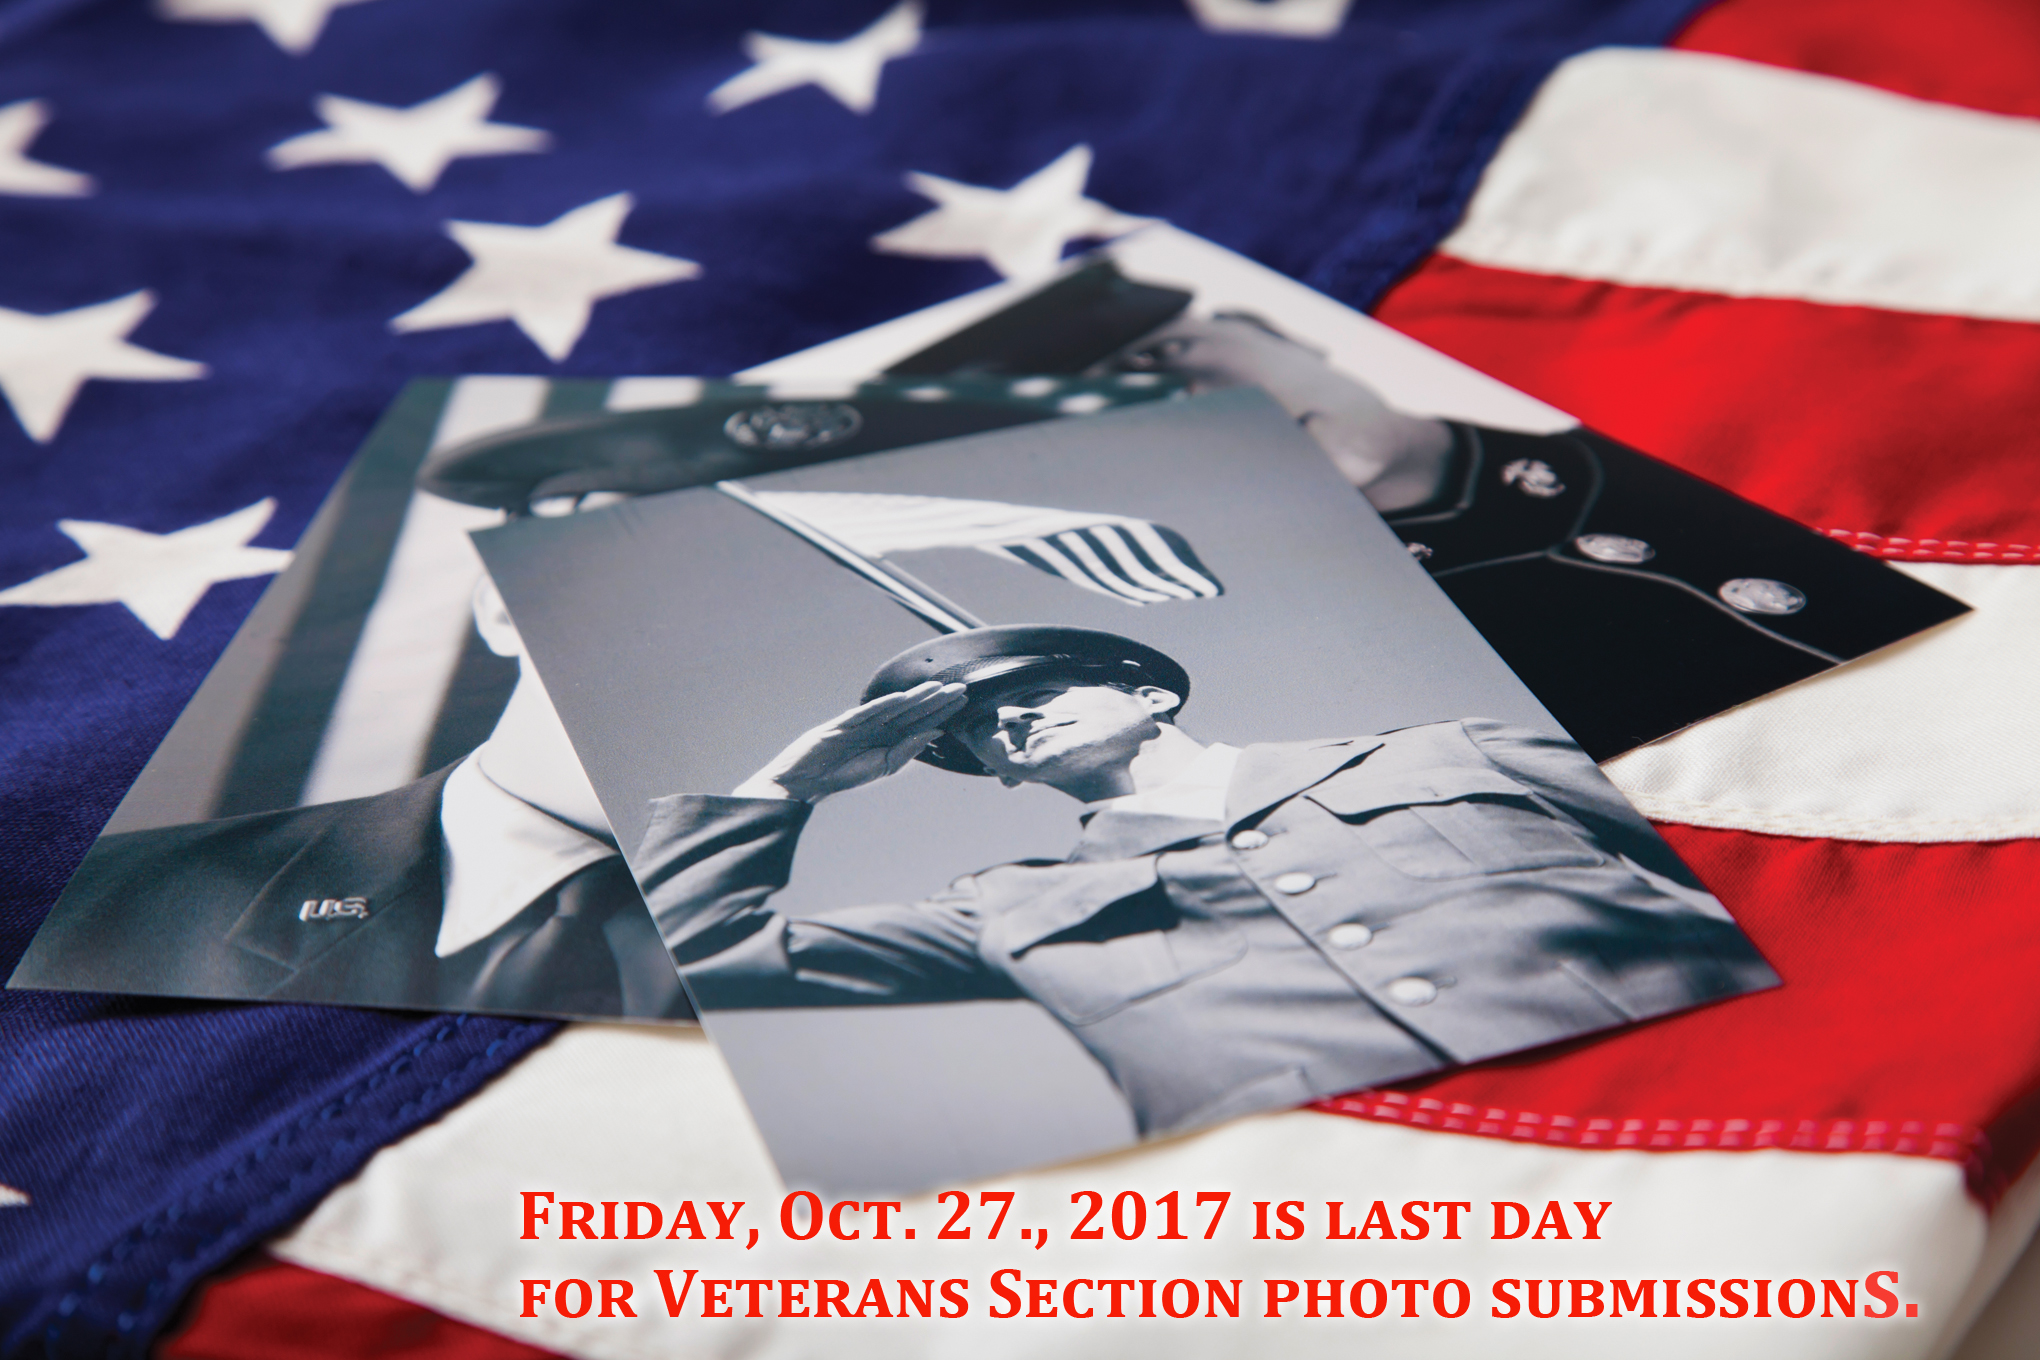 Veteran Section photo submissions due by Friday